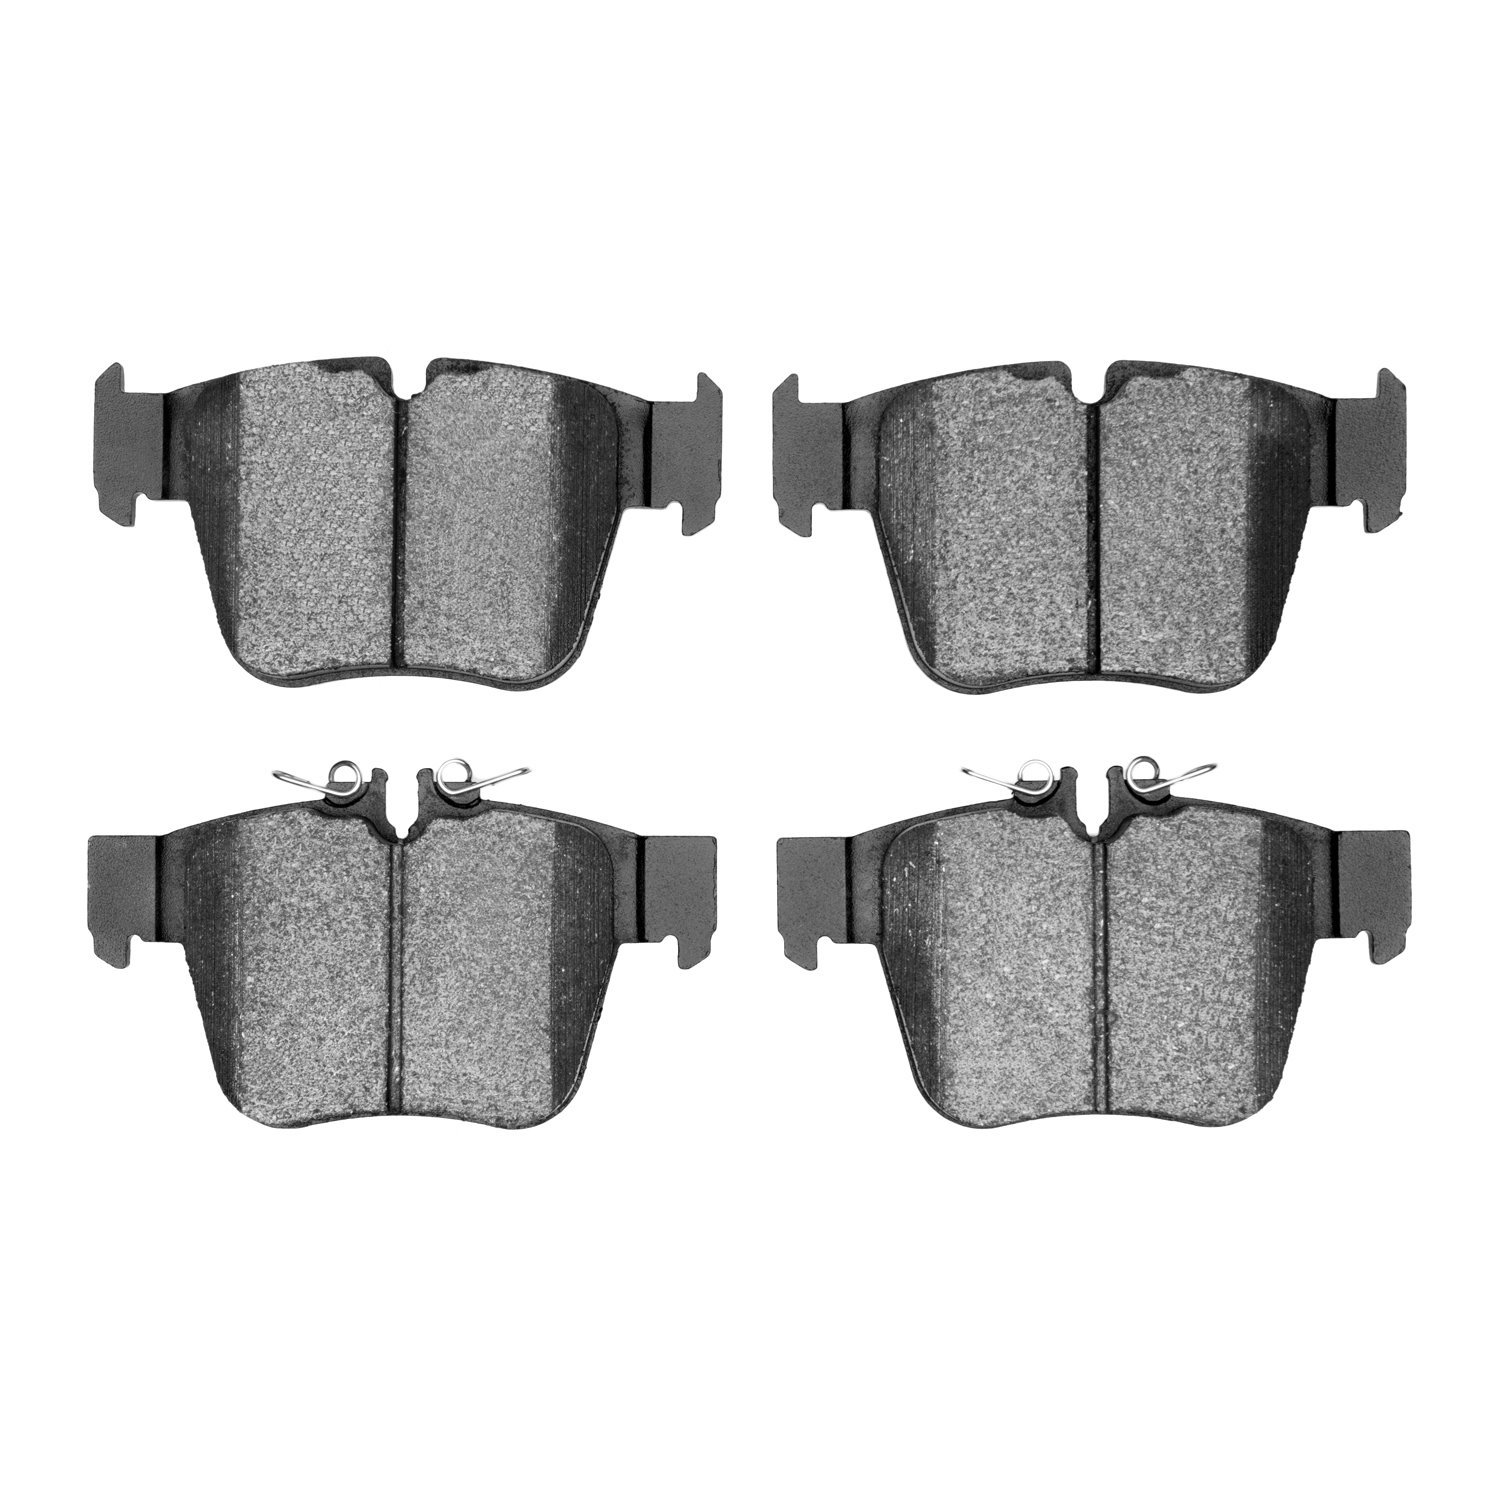 Ceramic Brake Pads, Fits Select Mercedes-Benz, Position: Rear & Front